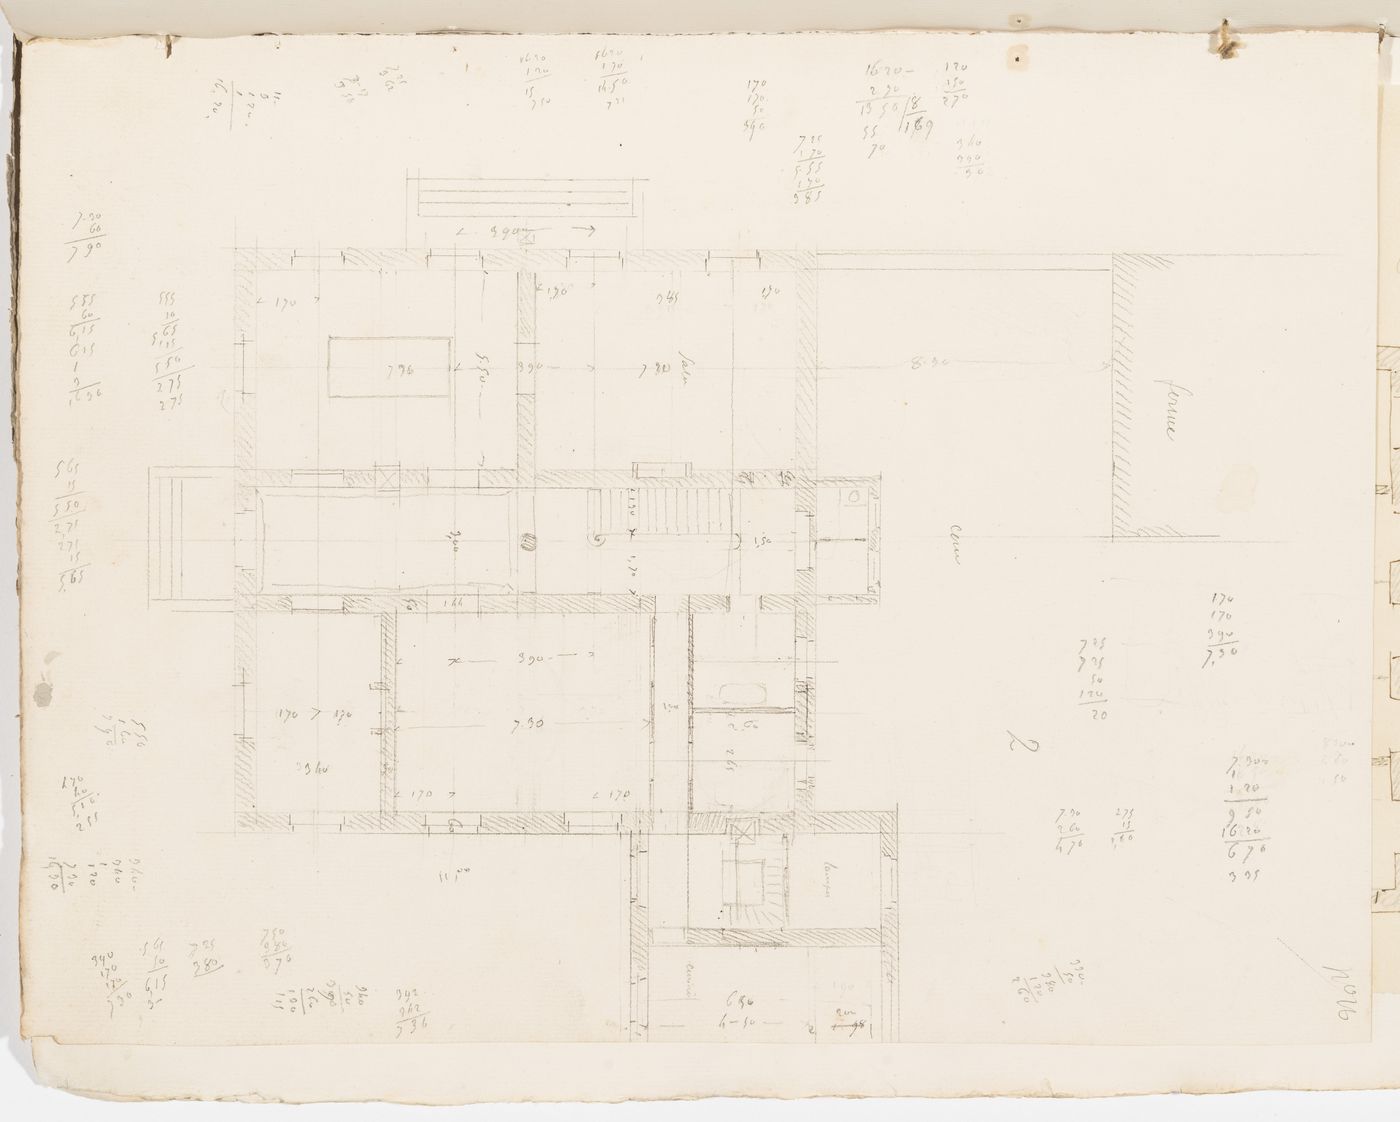 Project no. 10 for a country house for comte Treilhard: Ground floor plan; verso: Project no. 9 for a country house for M. de Treilhard: Plan